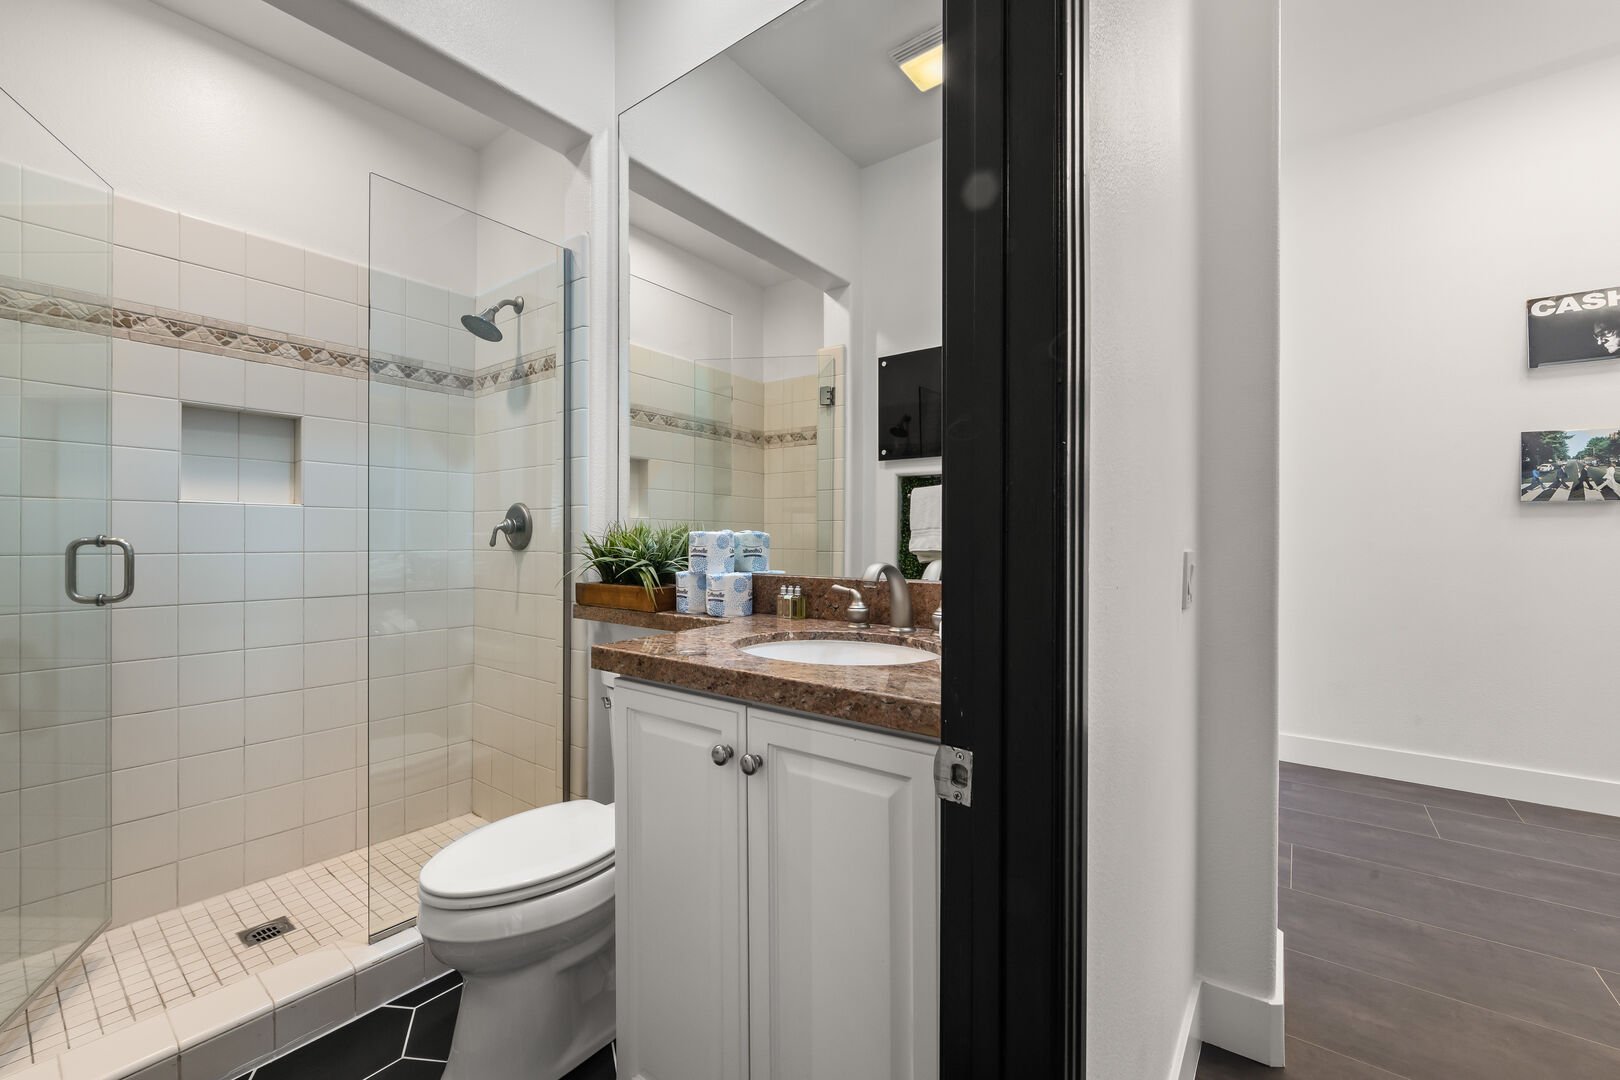 The private en Suite bathroom features a tile shower and granite countertop.